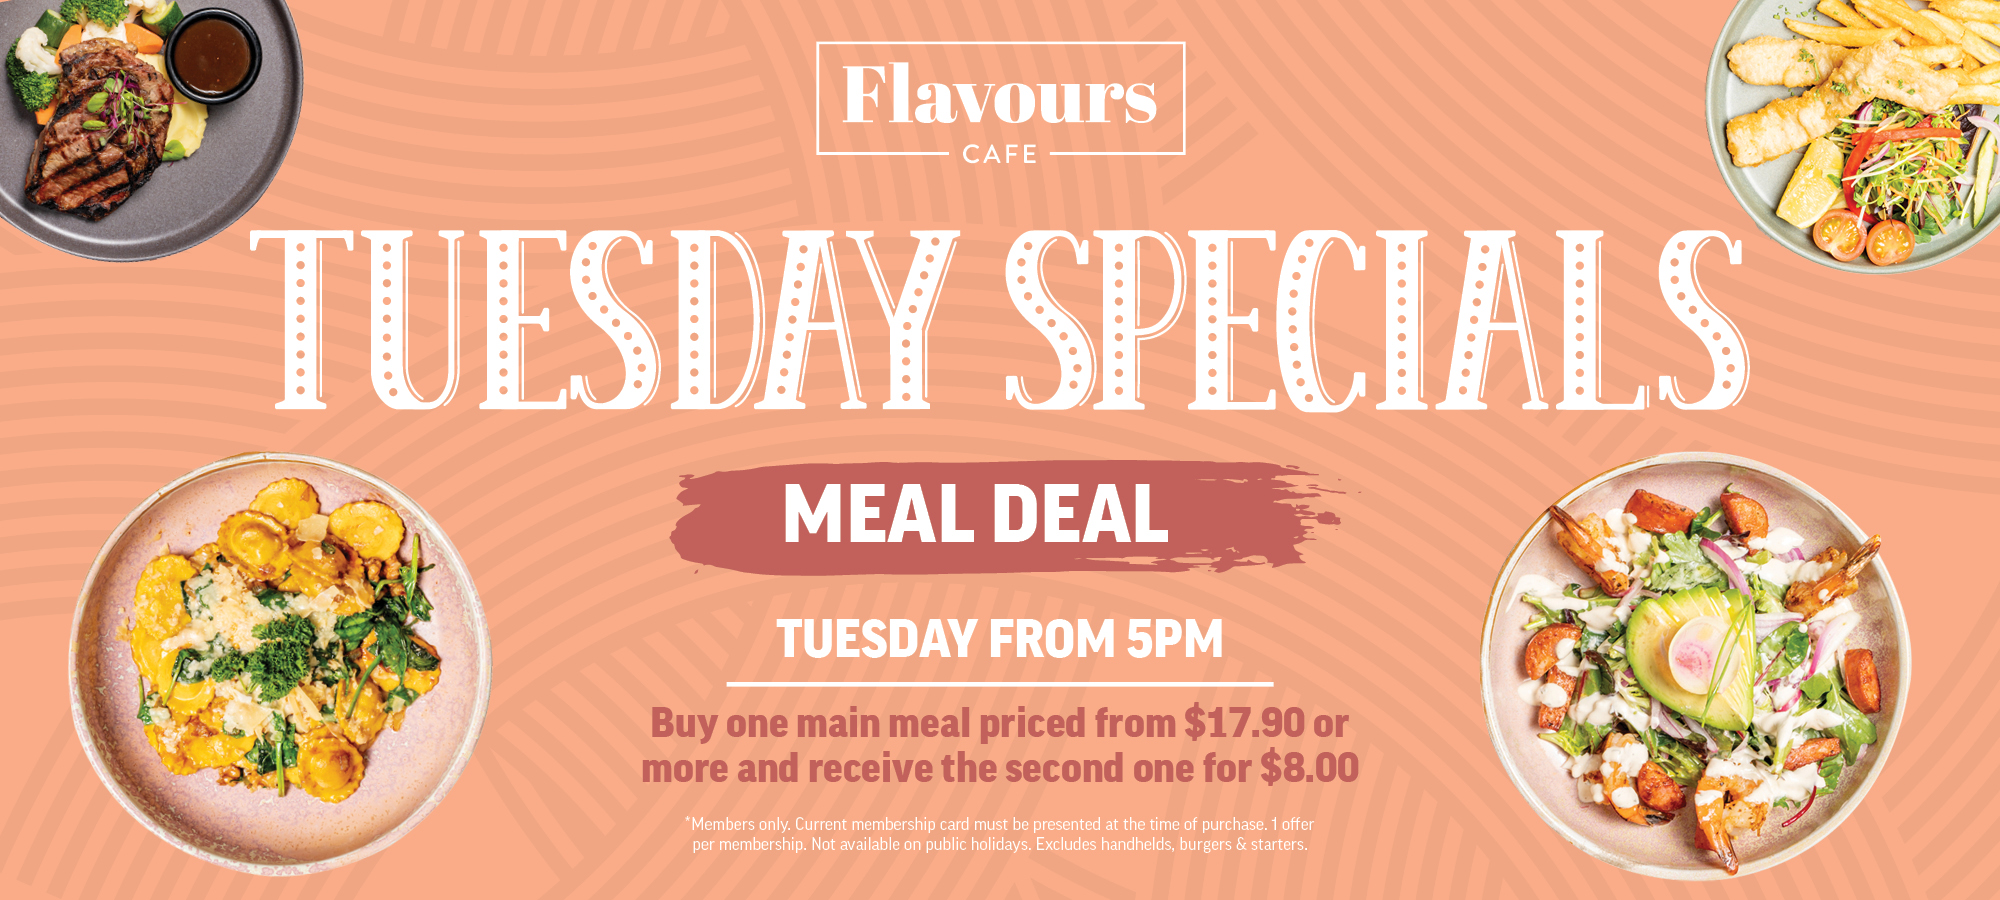 Tuesday Meal Deal